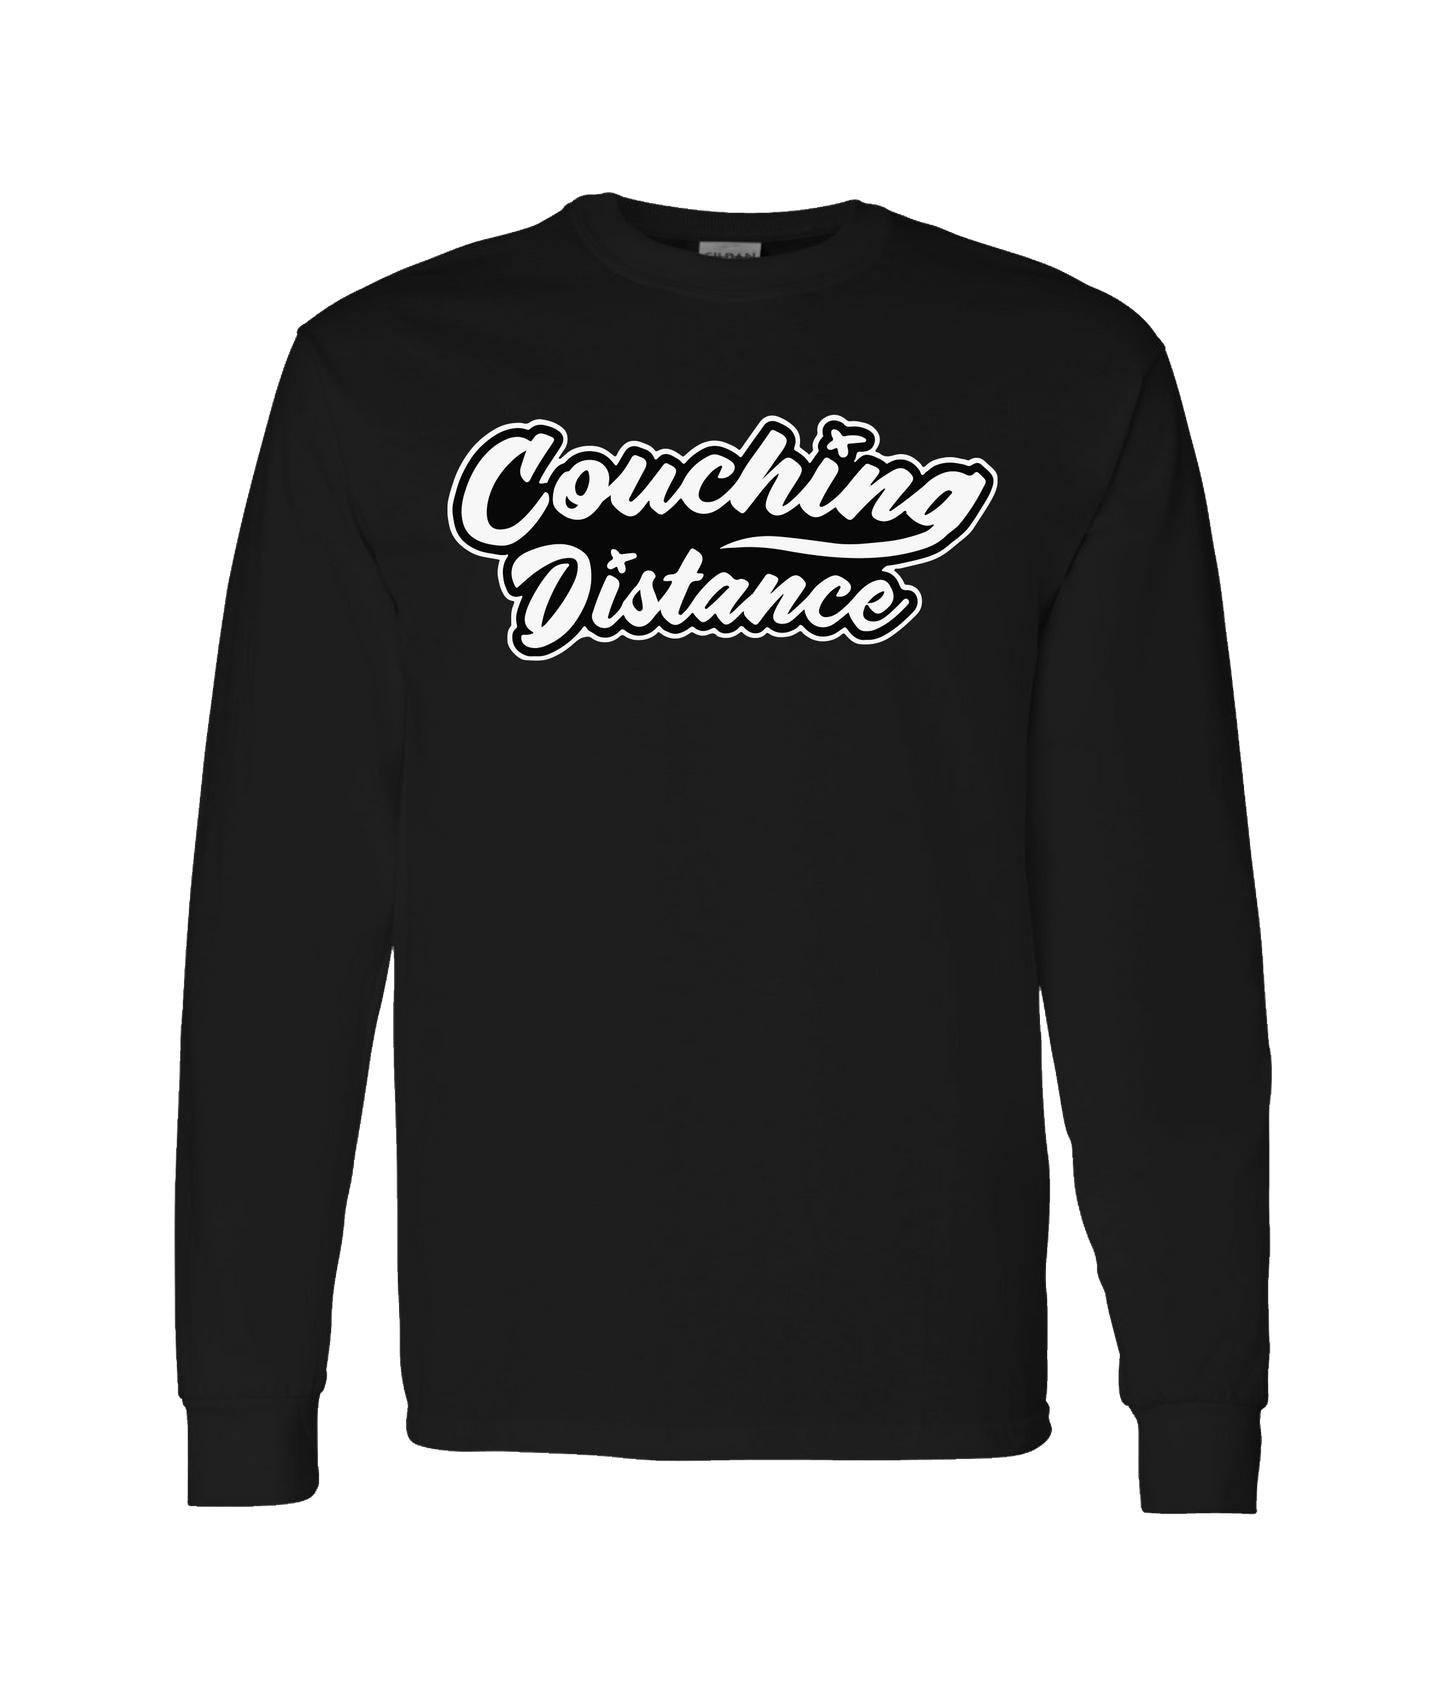 Couching Distance - Logo - Black Long Sleeve T